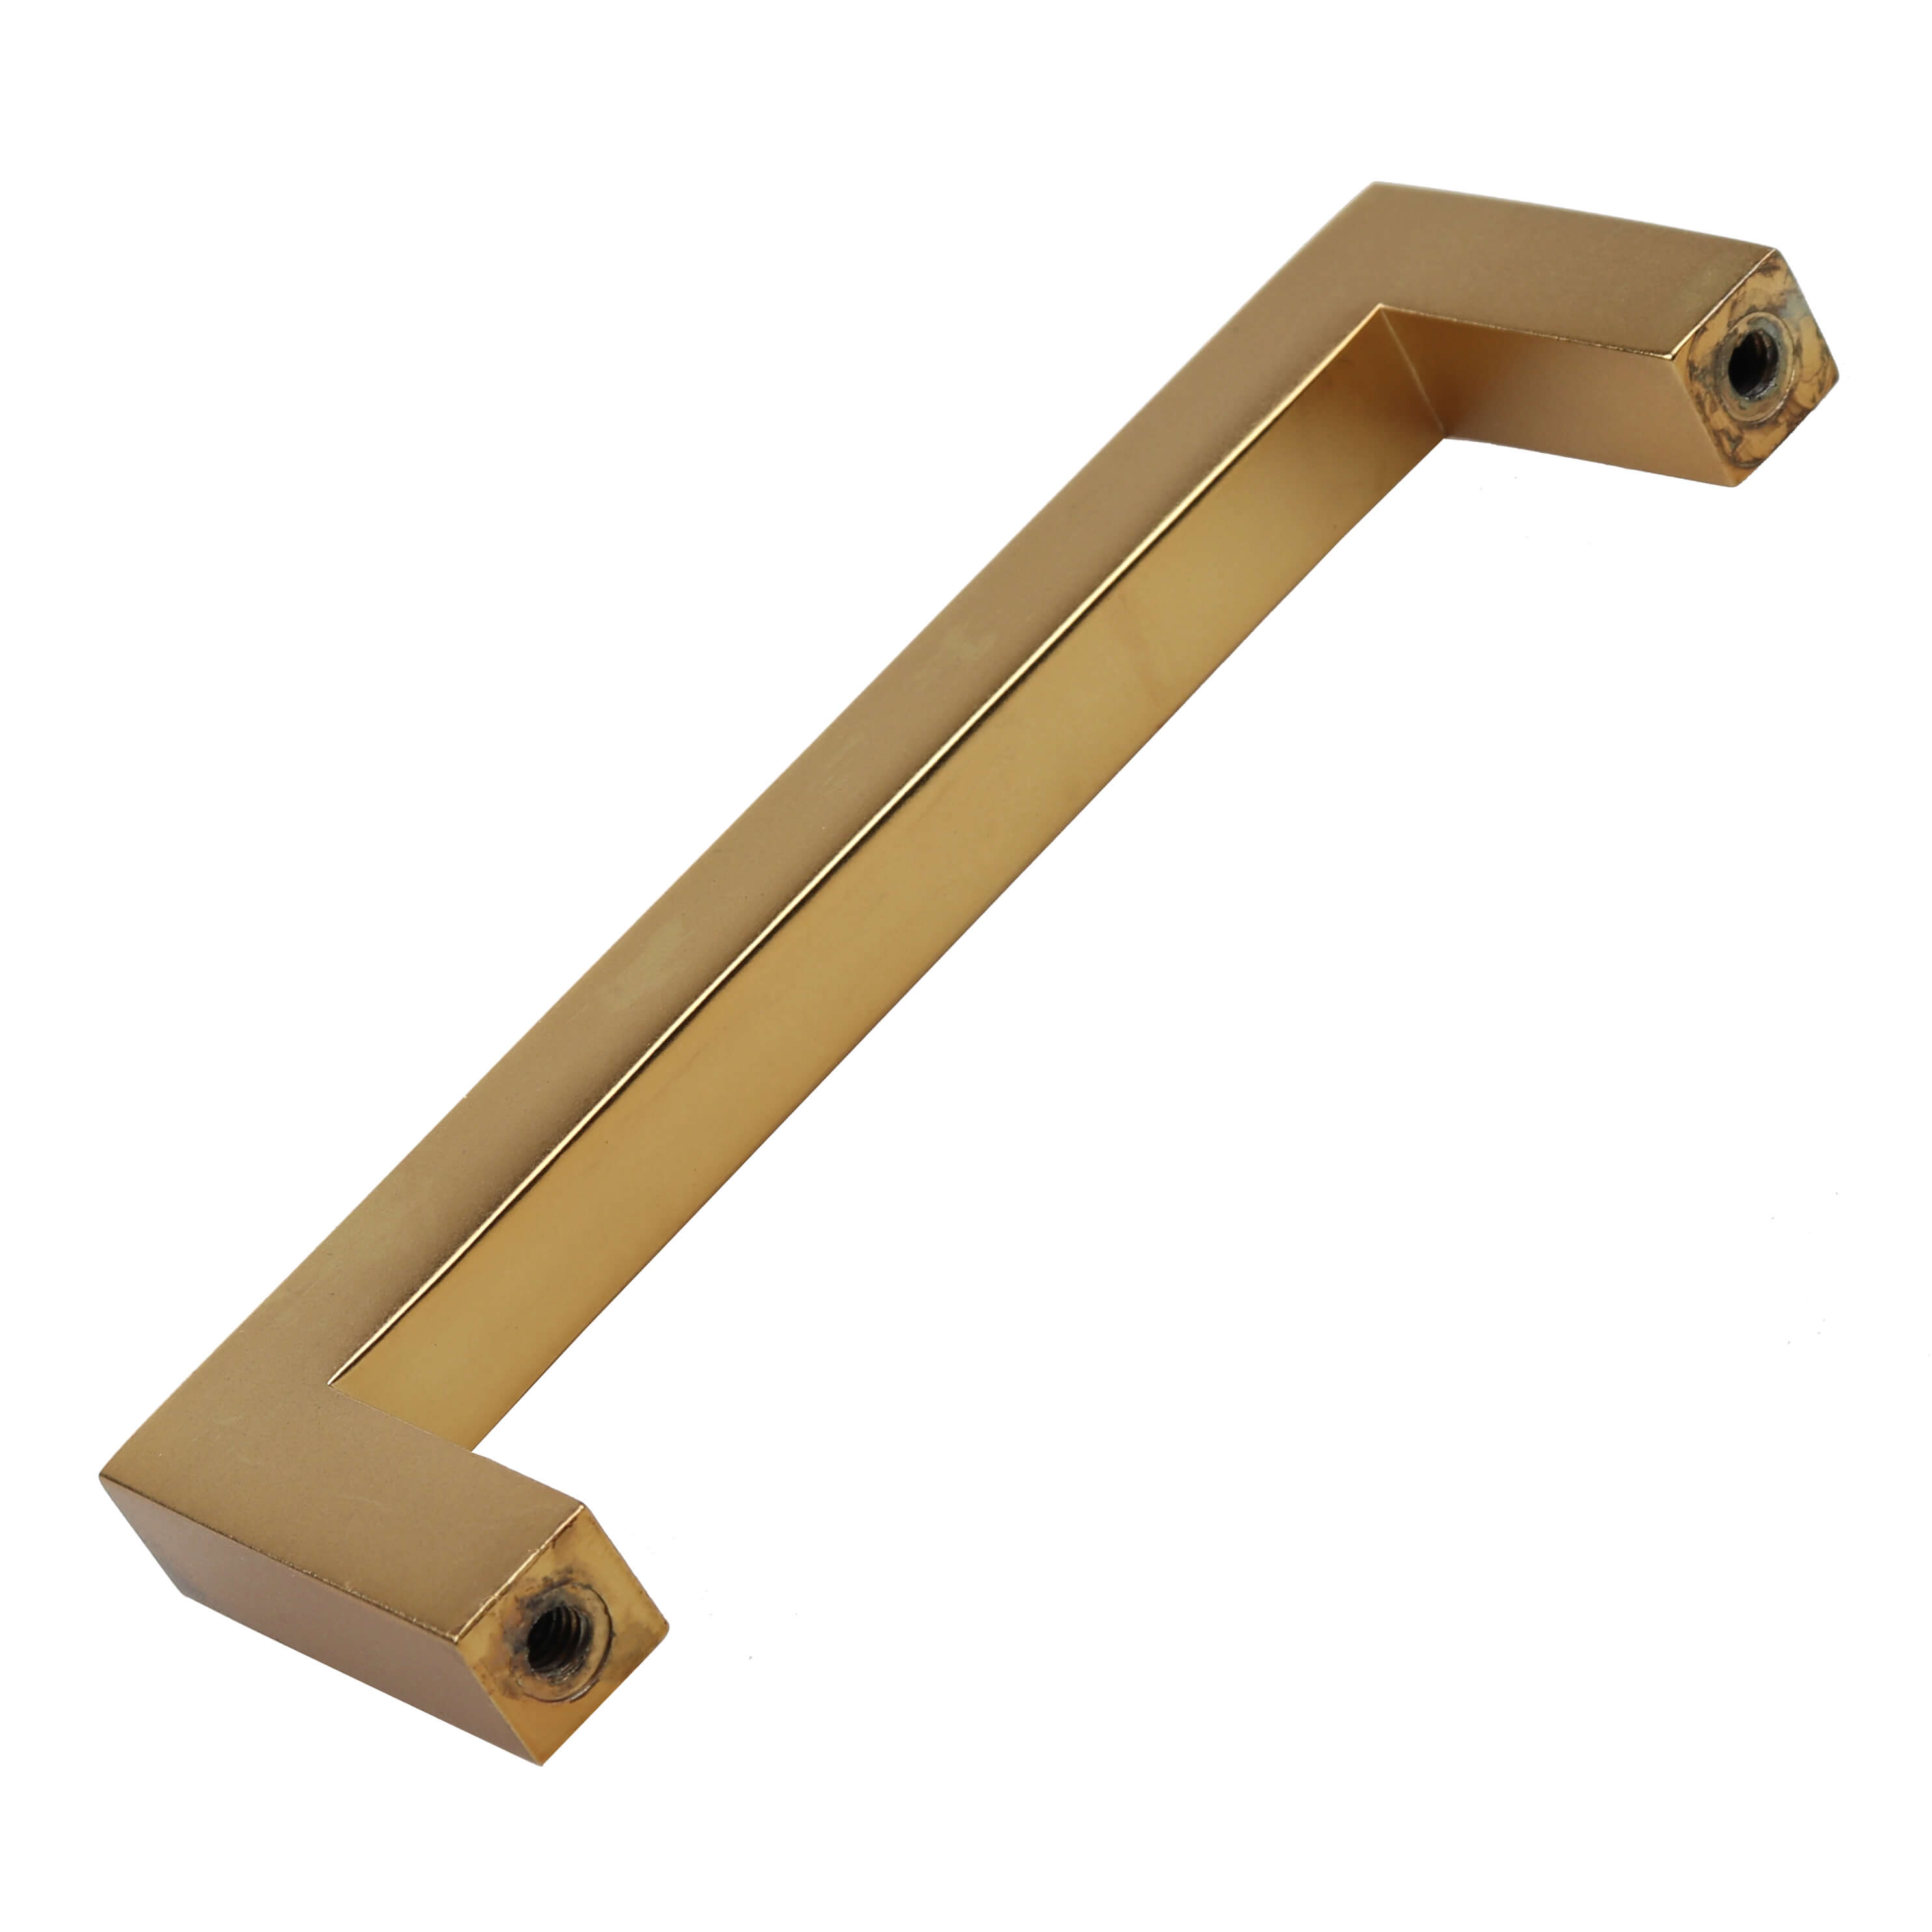 GlideRite 3-3/4 in. Center Solid Square Bar Cabinet Pulls, Brass Gold, Pack of 5 - image 3 of 3